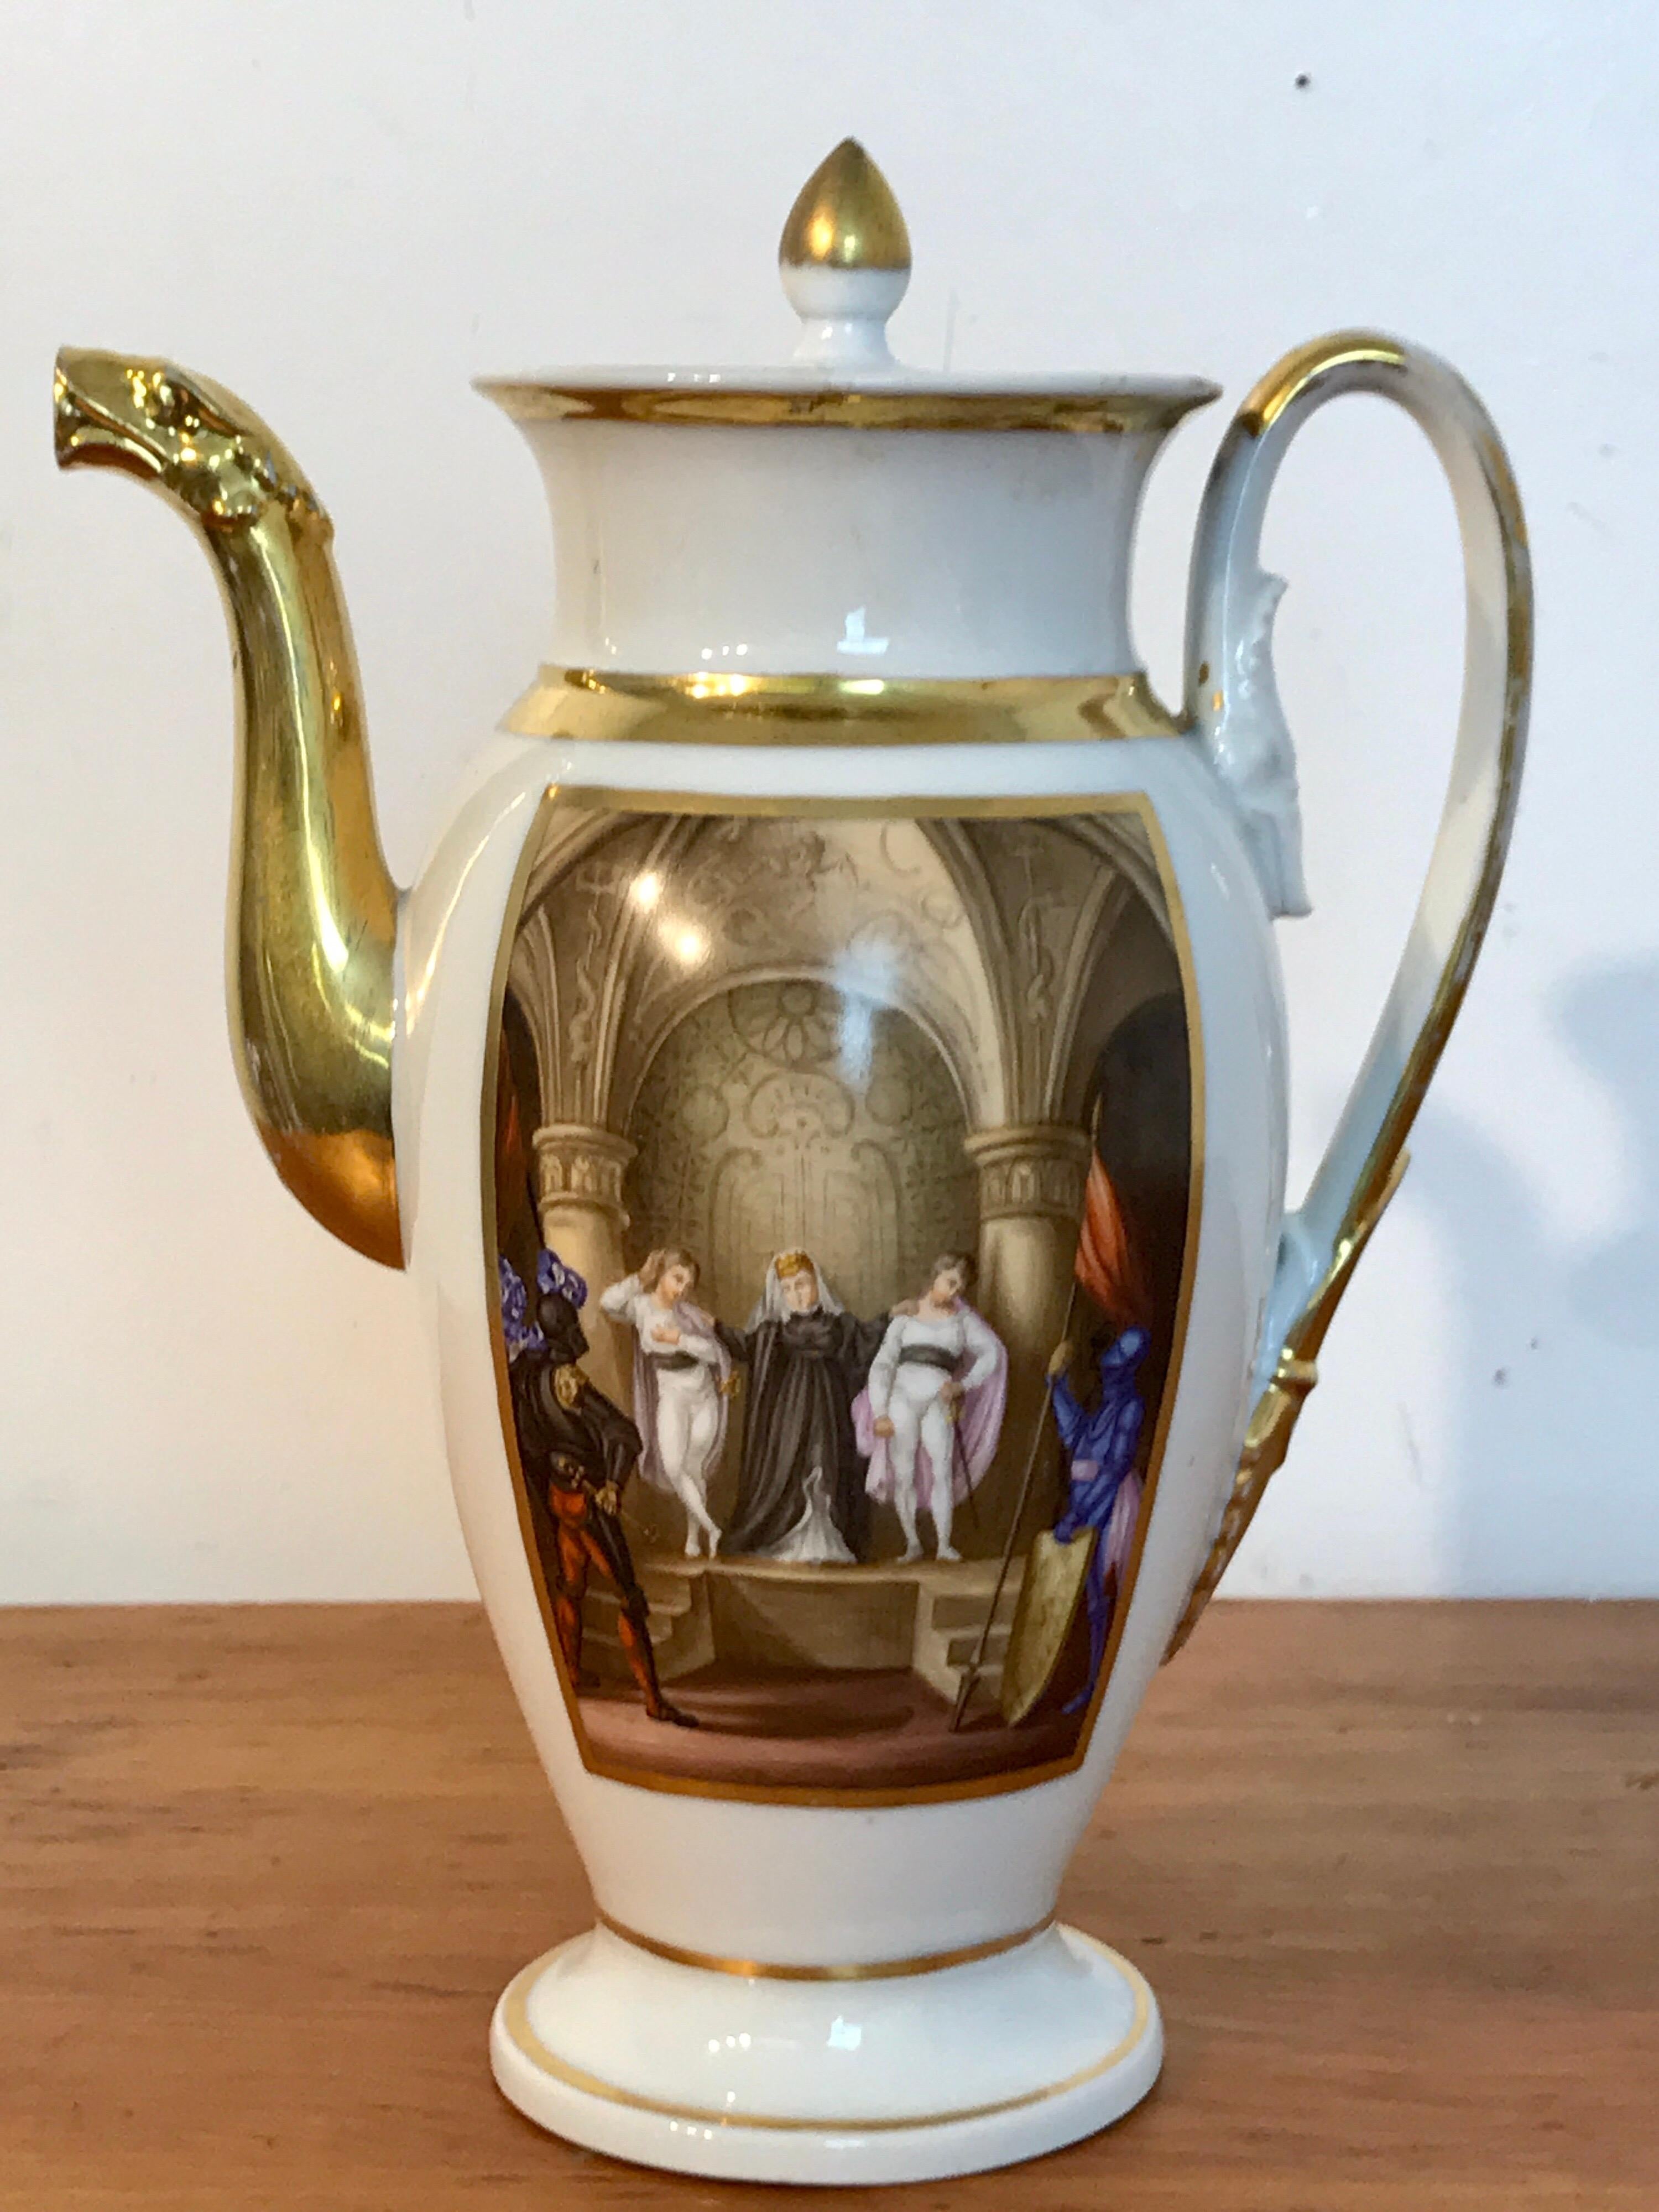 Old Paris operatic/theatrical motif coffee pot, 1840
Painted on both sides with two different interior theatrical scenes. Unmarked.